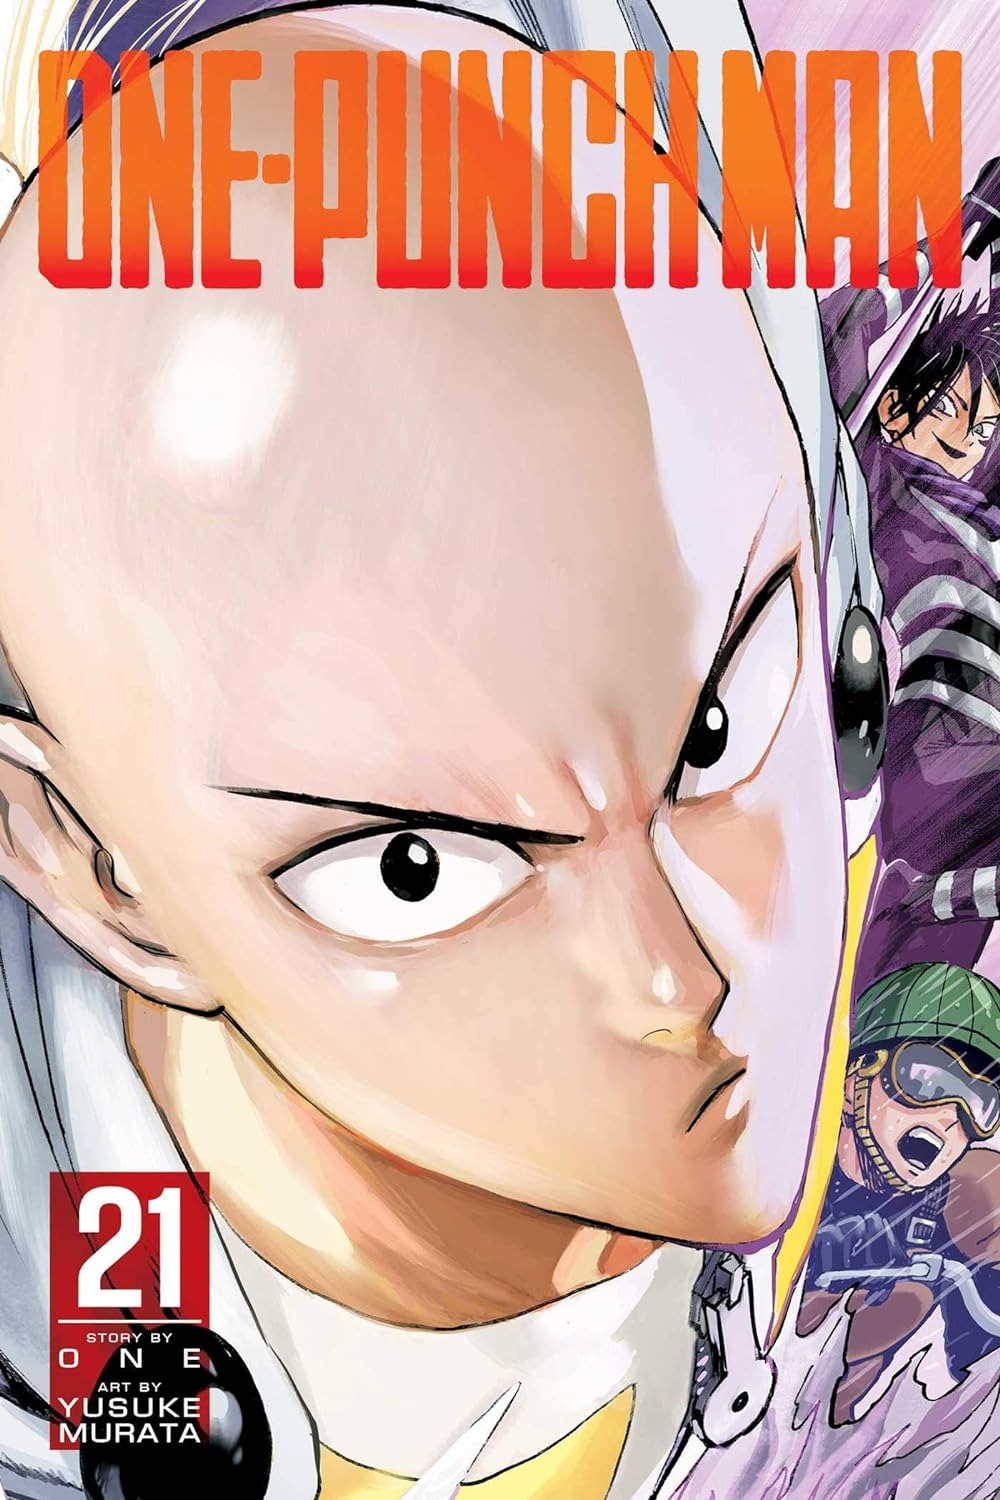 One-Punch Man, Vol. 21 (21) - NEW